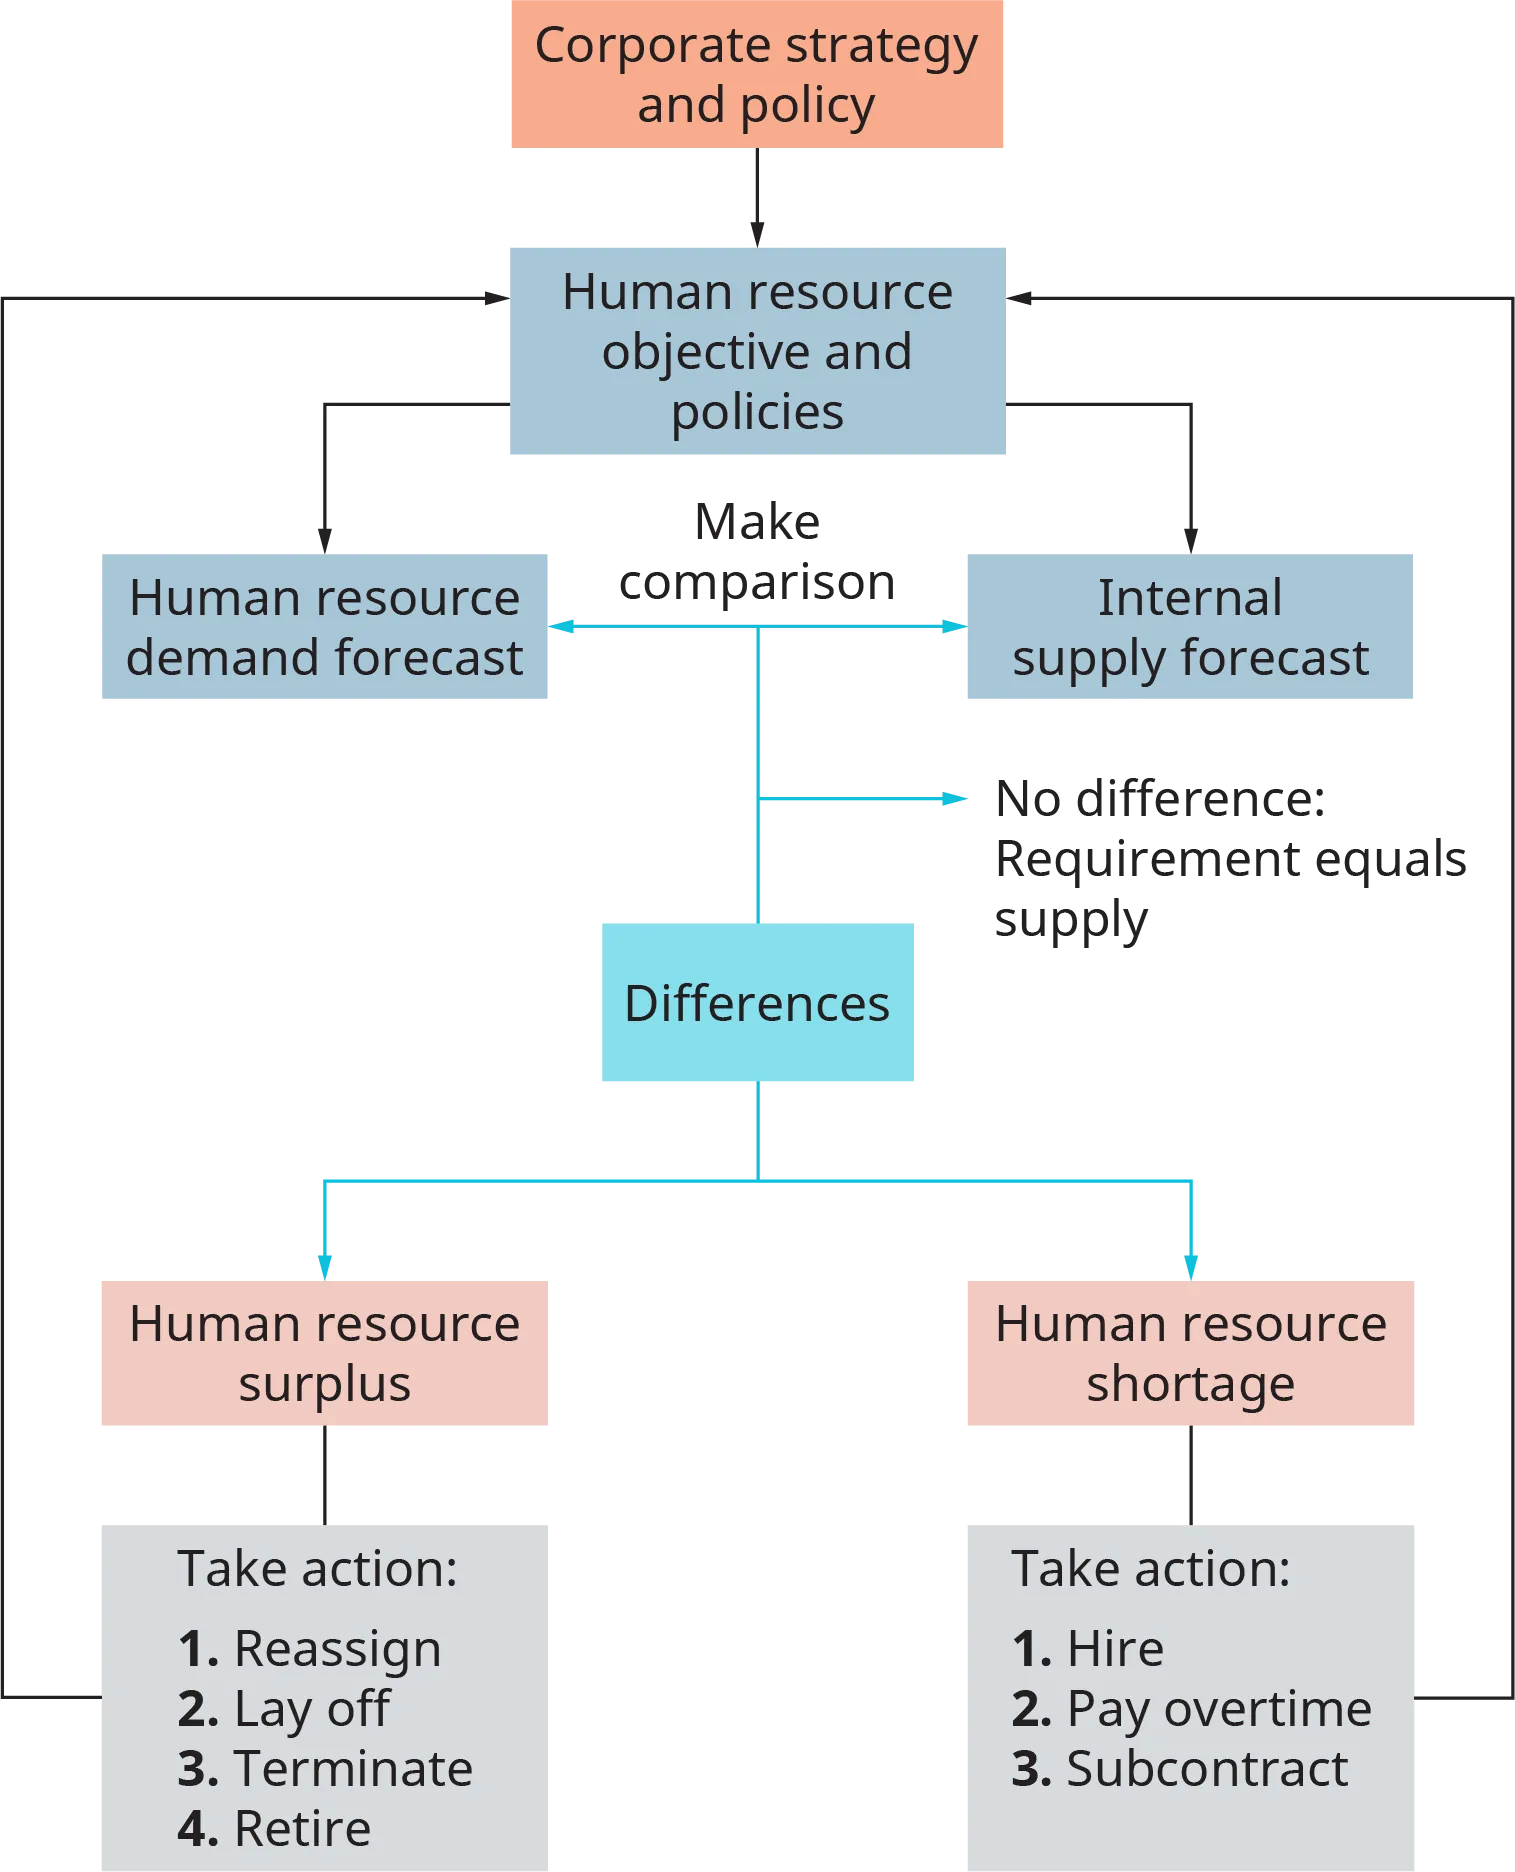 The chart starts with corporate strategy and policy, and flows into human resource objective and policies. This flows into 2 separate boxes, one labeled human resource demand forecast, and the other labeled internal supply forecast. The chart says to make a comparison between these two forecasts. From this comparison, the process flows into a box labeled, differences. A note reads, if no difference, requirement equals supply. From differences, the process flows into two separate boxes, one labeled human resource surplus, and the other labeled human resource shortage. From human resource surplus, the process flows into a box labeled, take action. 1, reassign. 2 lay off. 3 terminate. 4, retire. From human resource shortage, the process flows into a box labeled, take action. 1, hire. 2, pay overtime. 3, subcontract. From the take action boxes, the process flows back up into the human resource objective and policies box.